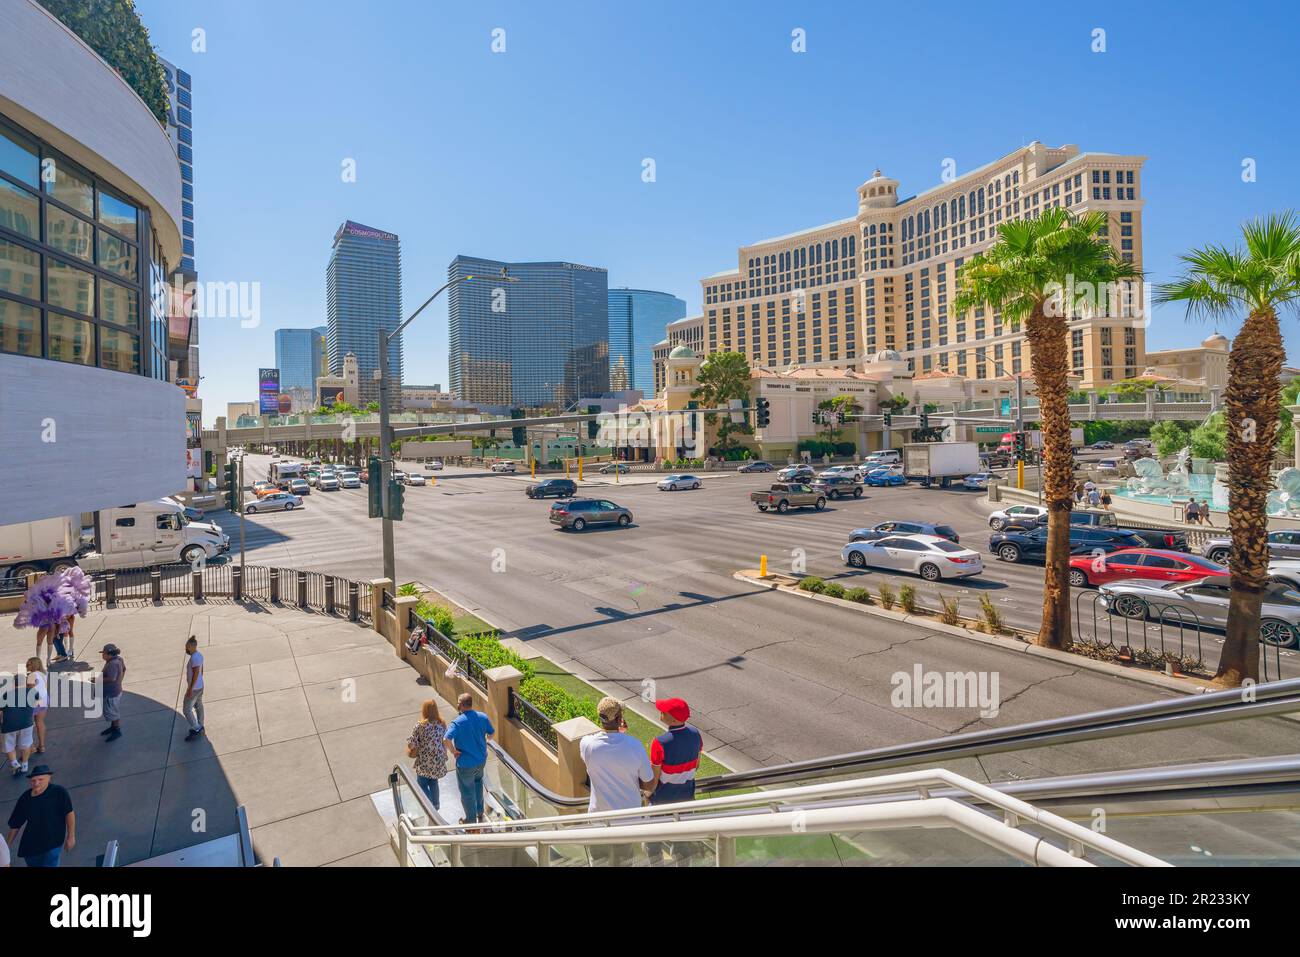 Las Vegas, Nevada, USA - October 1, 2021   Caesars Palace and Bellagio Hotel and Casino in Las Vegas Strip. Street view, architecture, people, sunny d Stock Photo